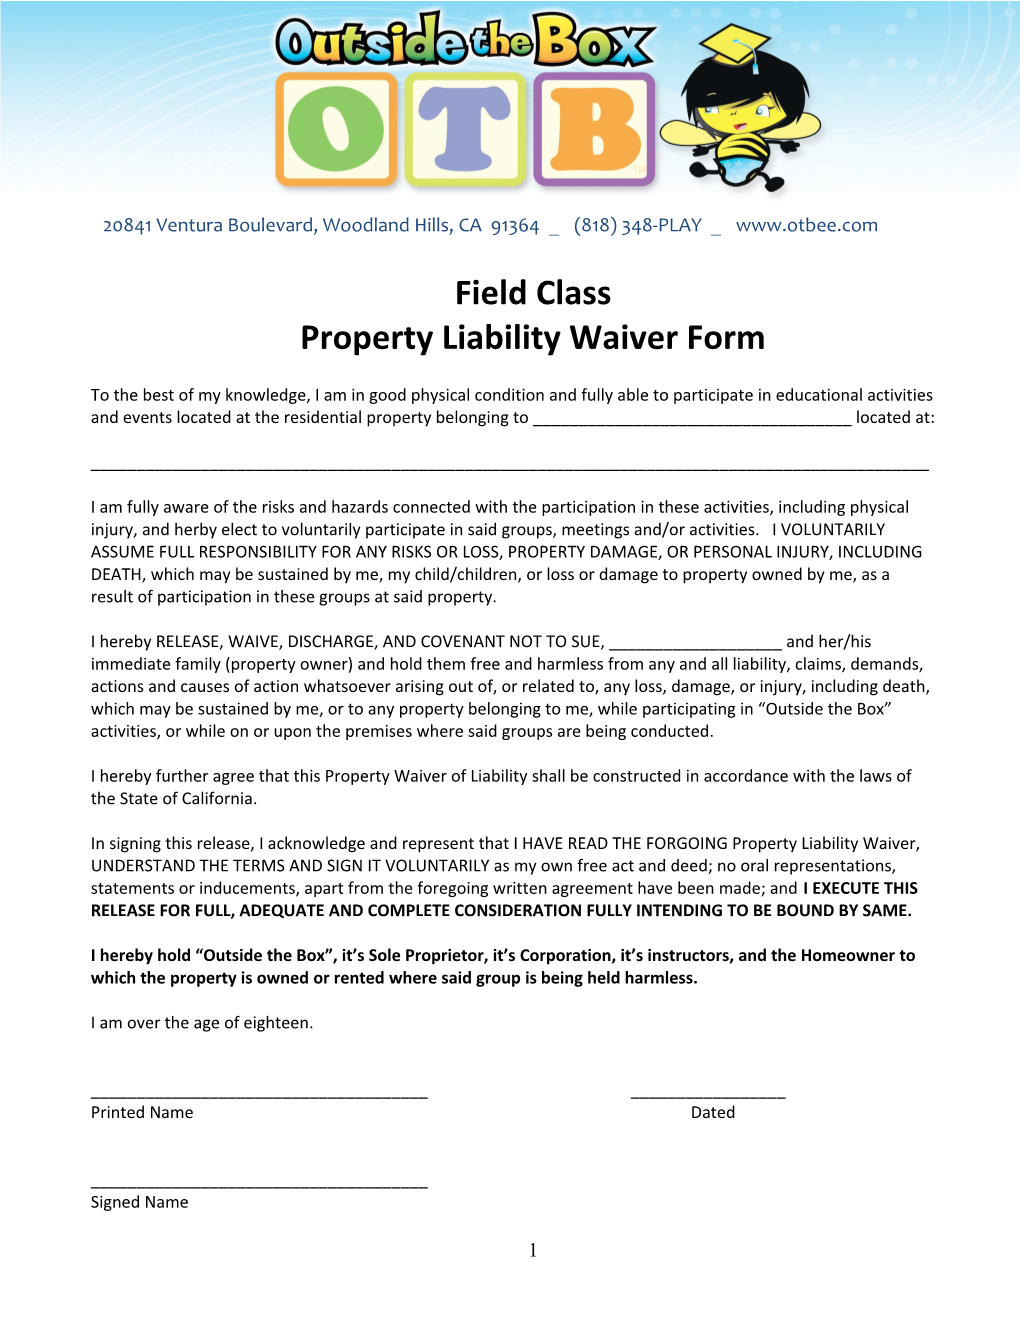 Property Liability Waiver Form